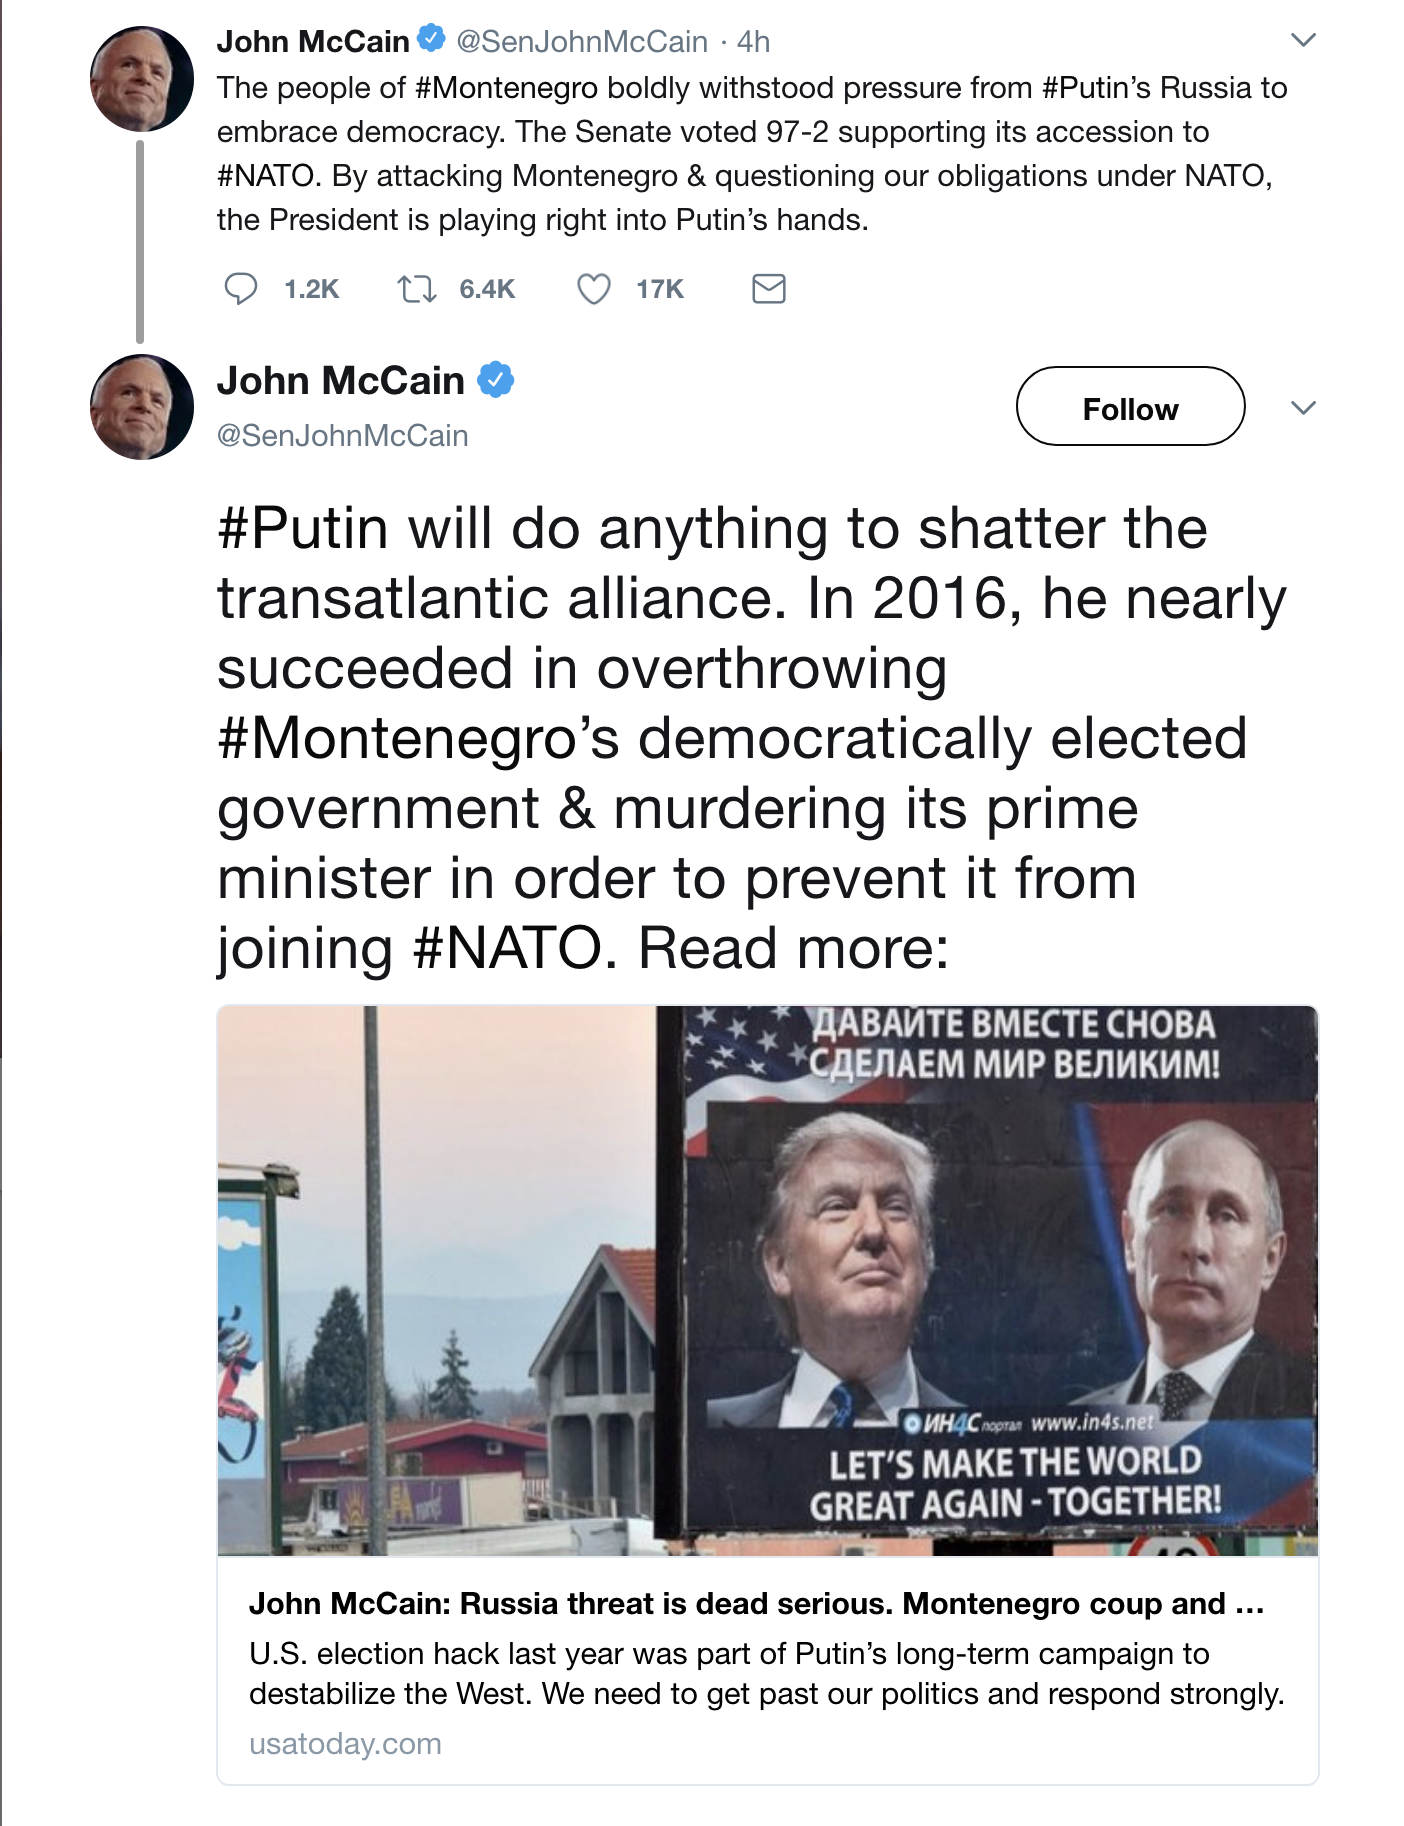 Screen-Shot-2018-07-18-at-2.53.03-PM McCain Sends Stern Warning For U.S. To Defend Montenegro, NATO From Donald Trump Corruption Crime Donald Trump Politics Russia Top Stories 